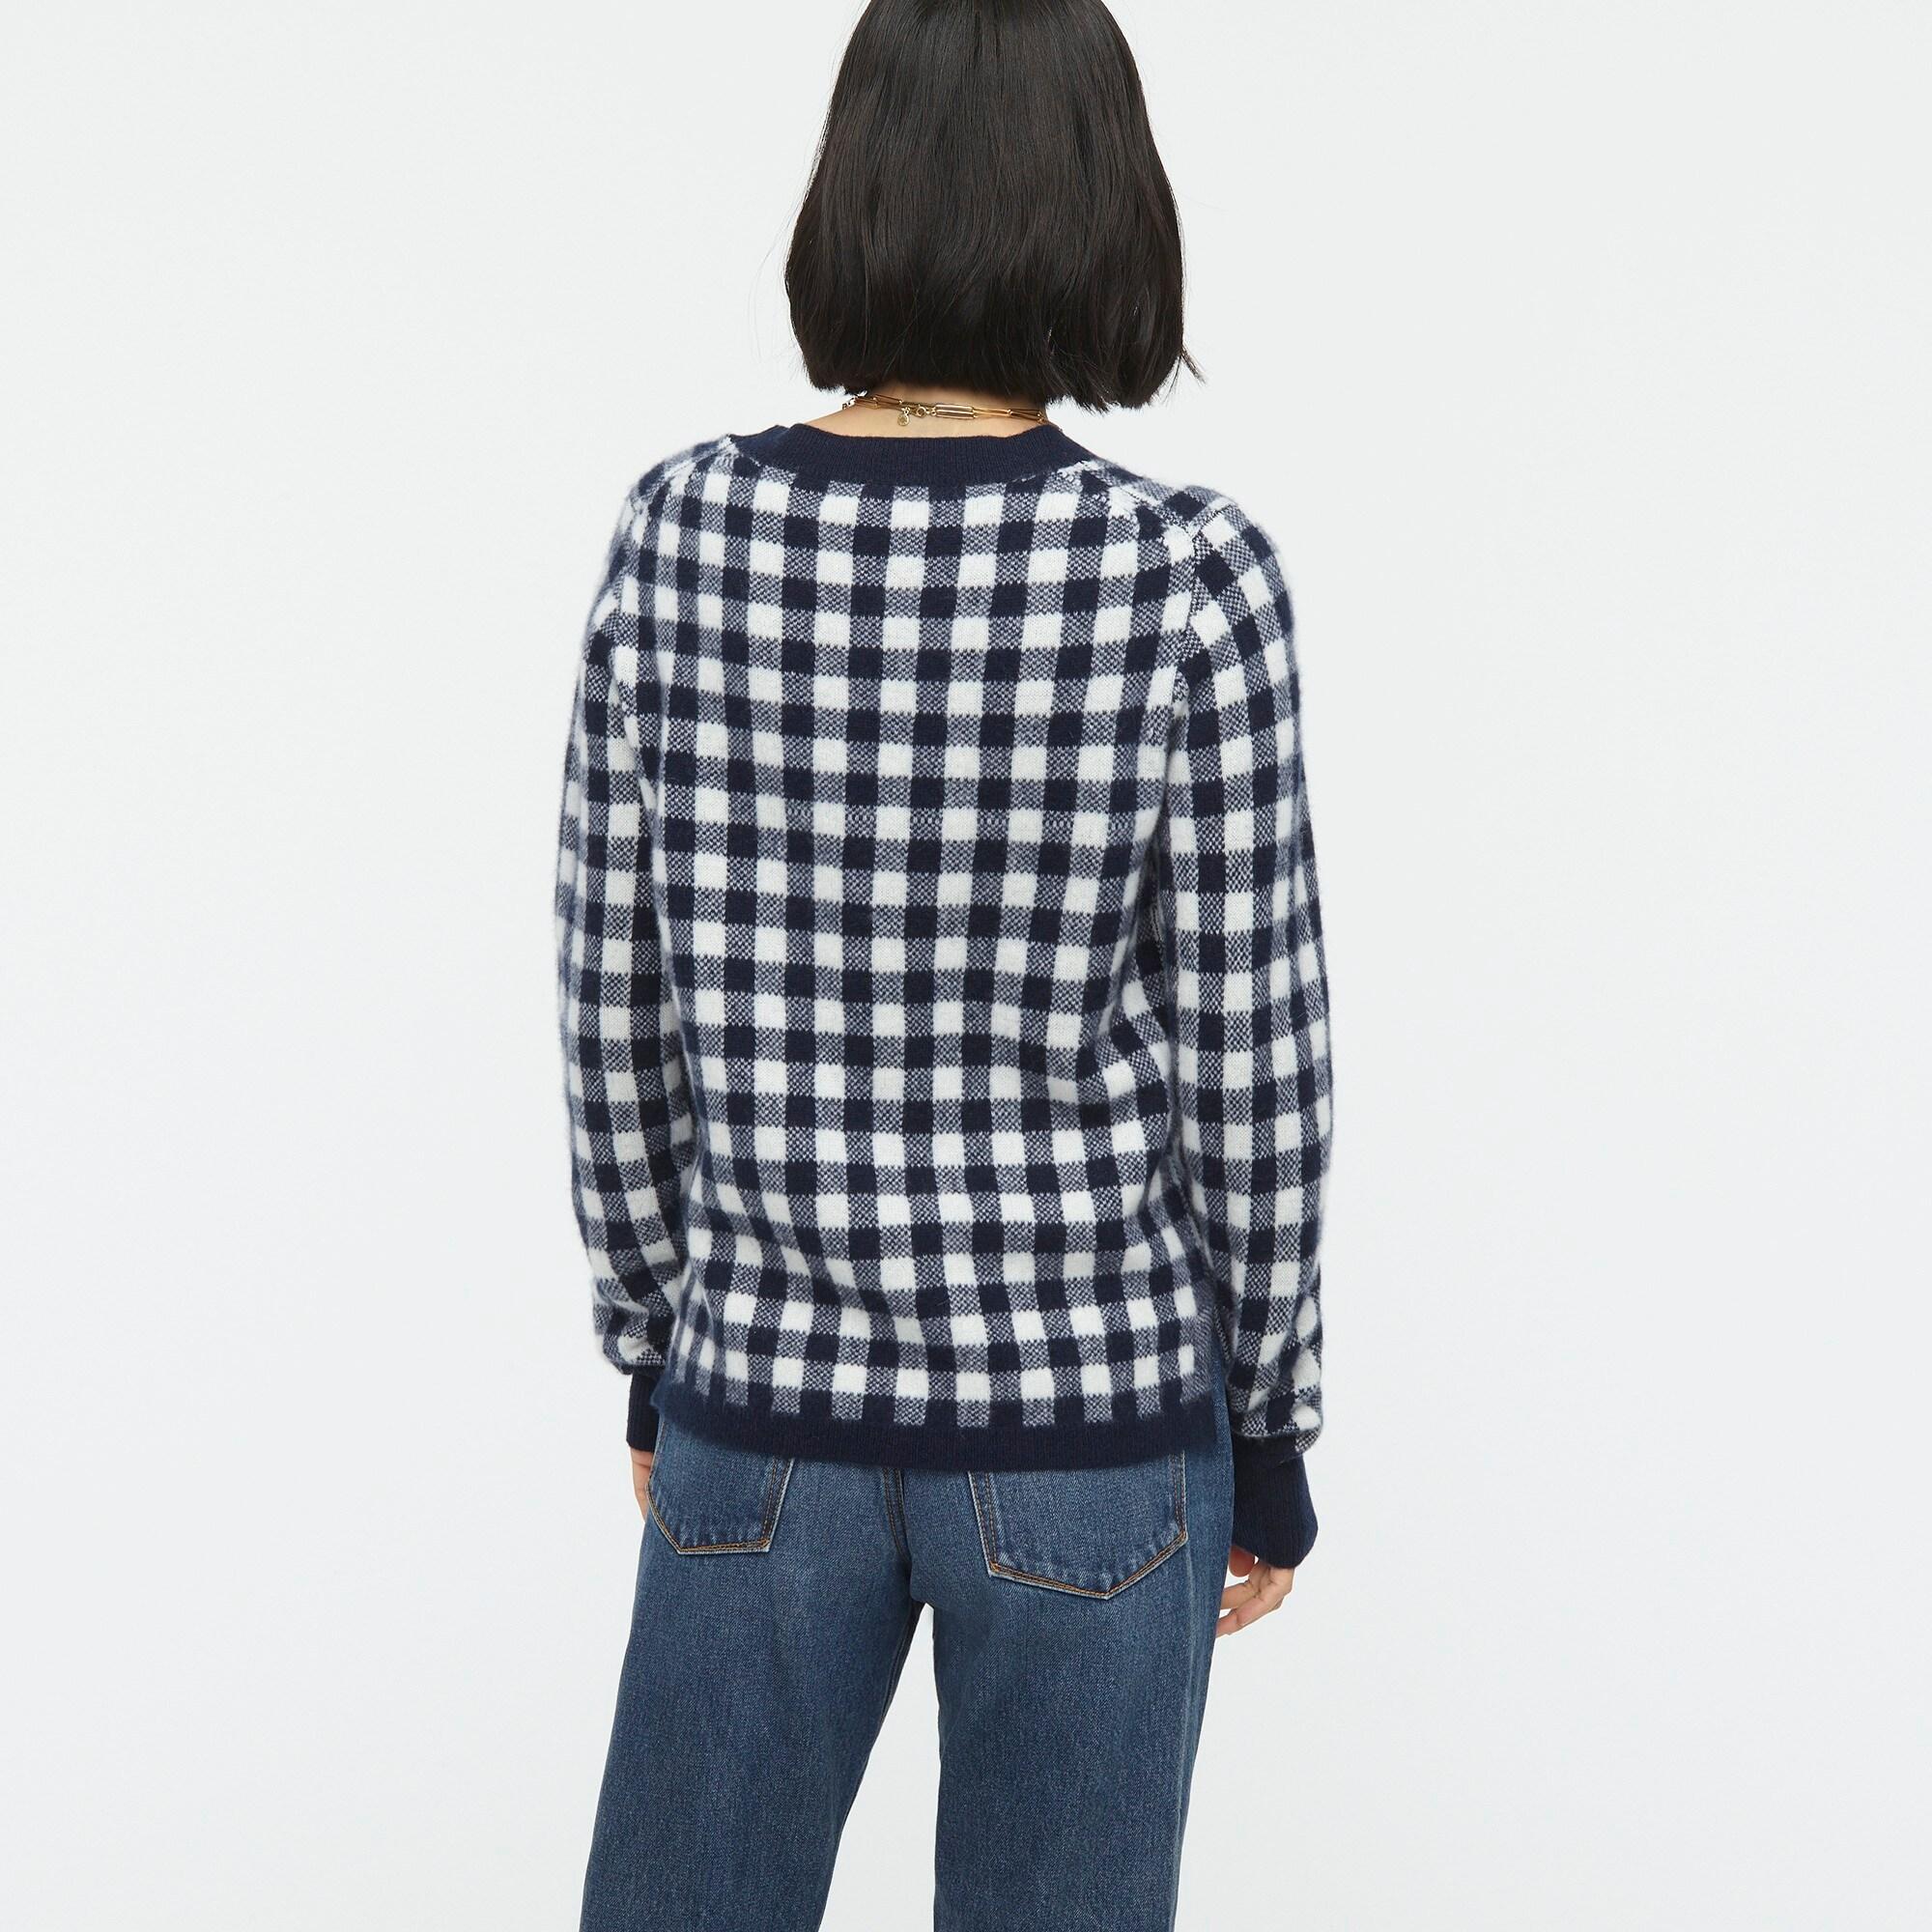 J.Crew Cashmere Crewneck Sweater In Gingham in Blue - Lyst